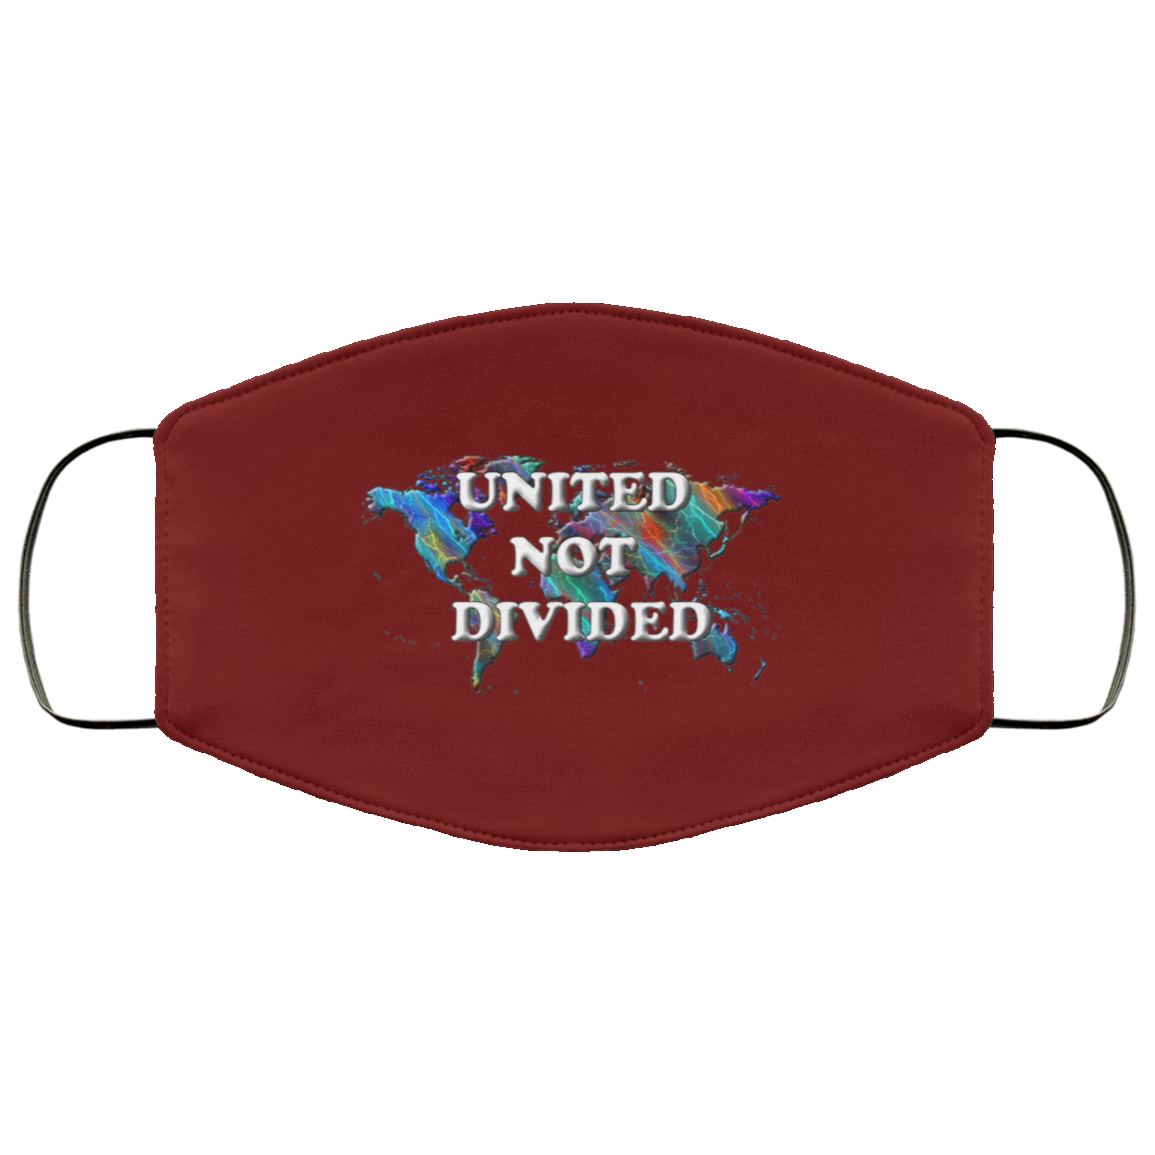 United Not Divided 2 Layer Face Mask